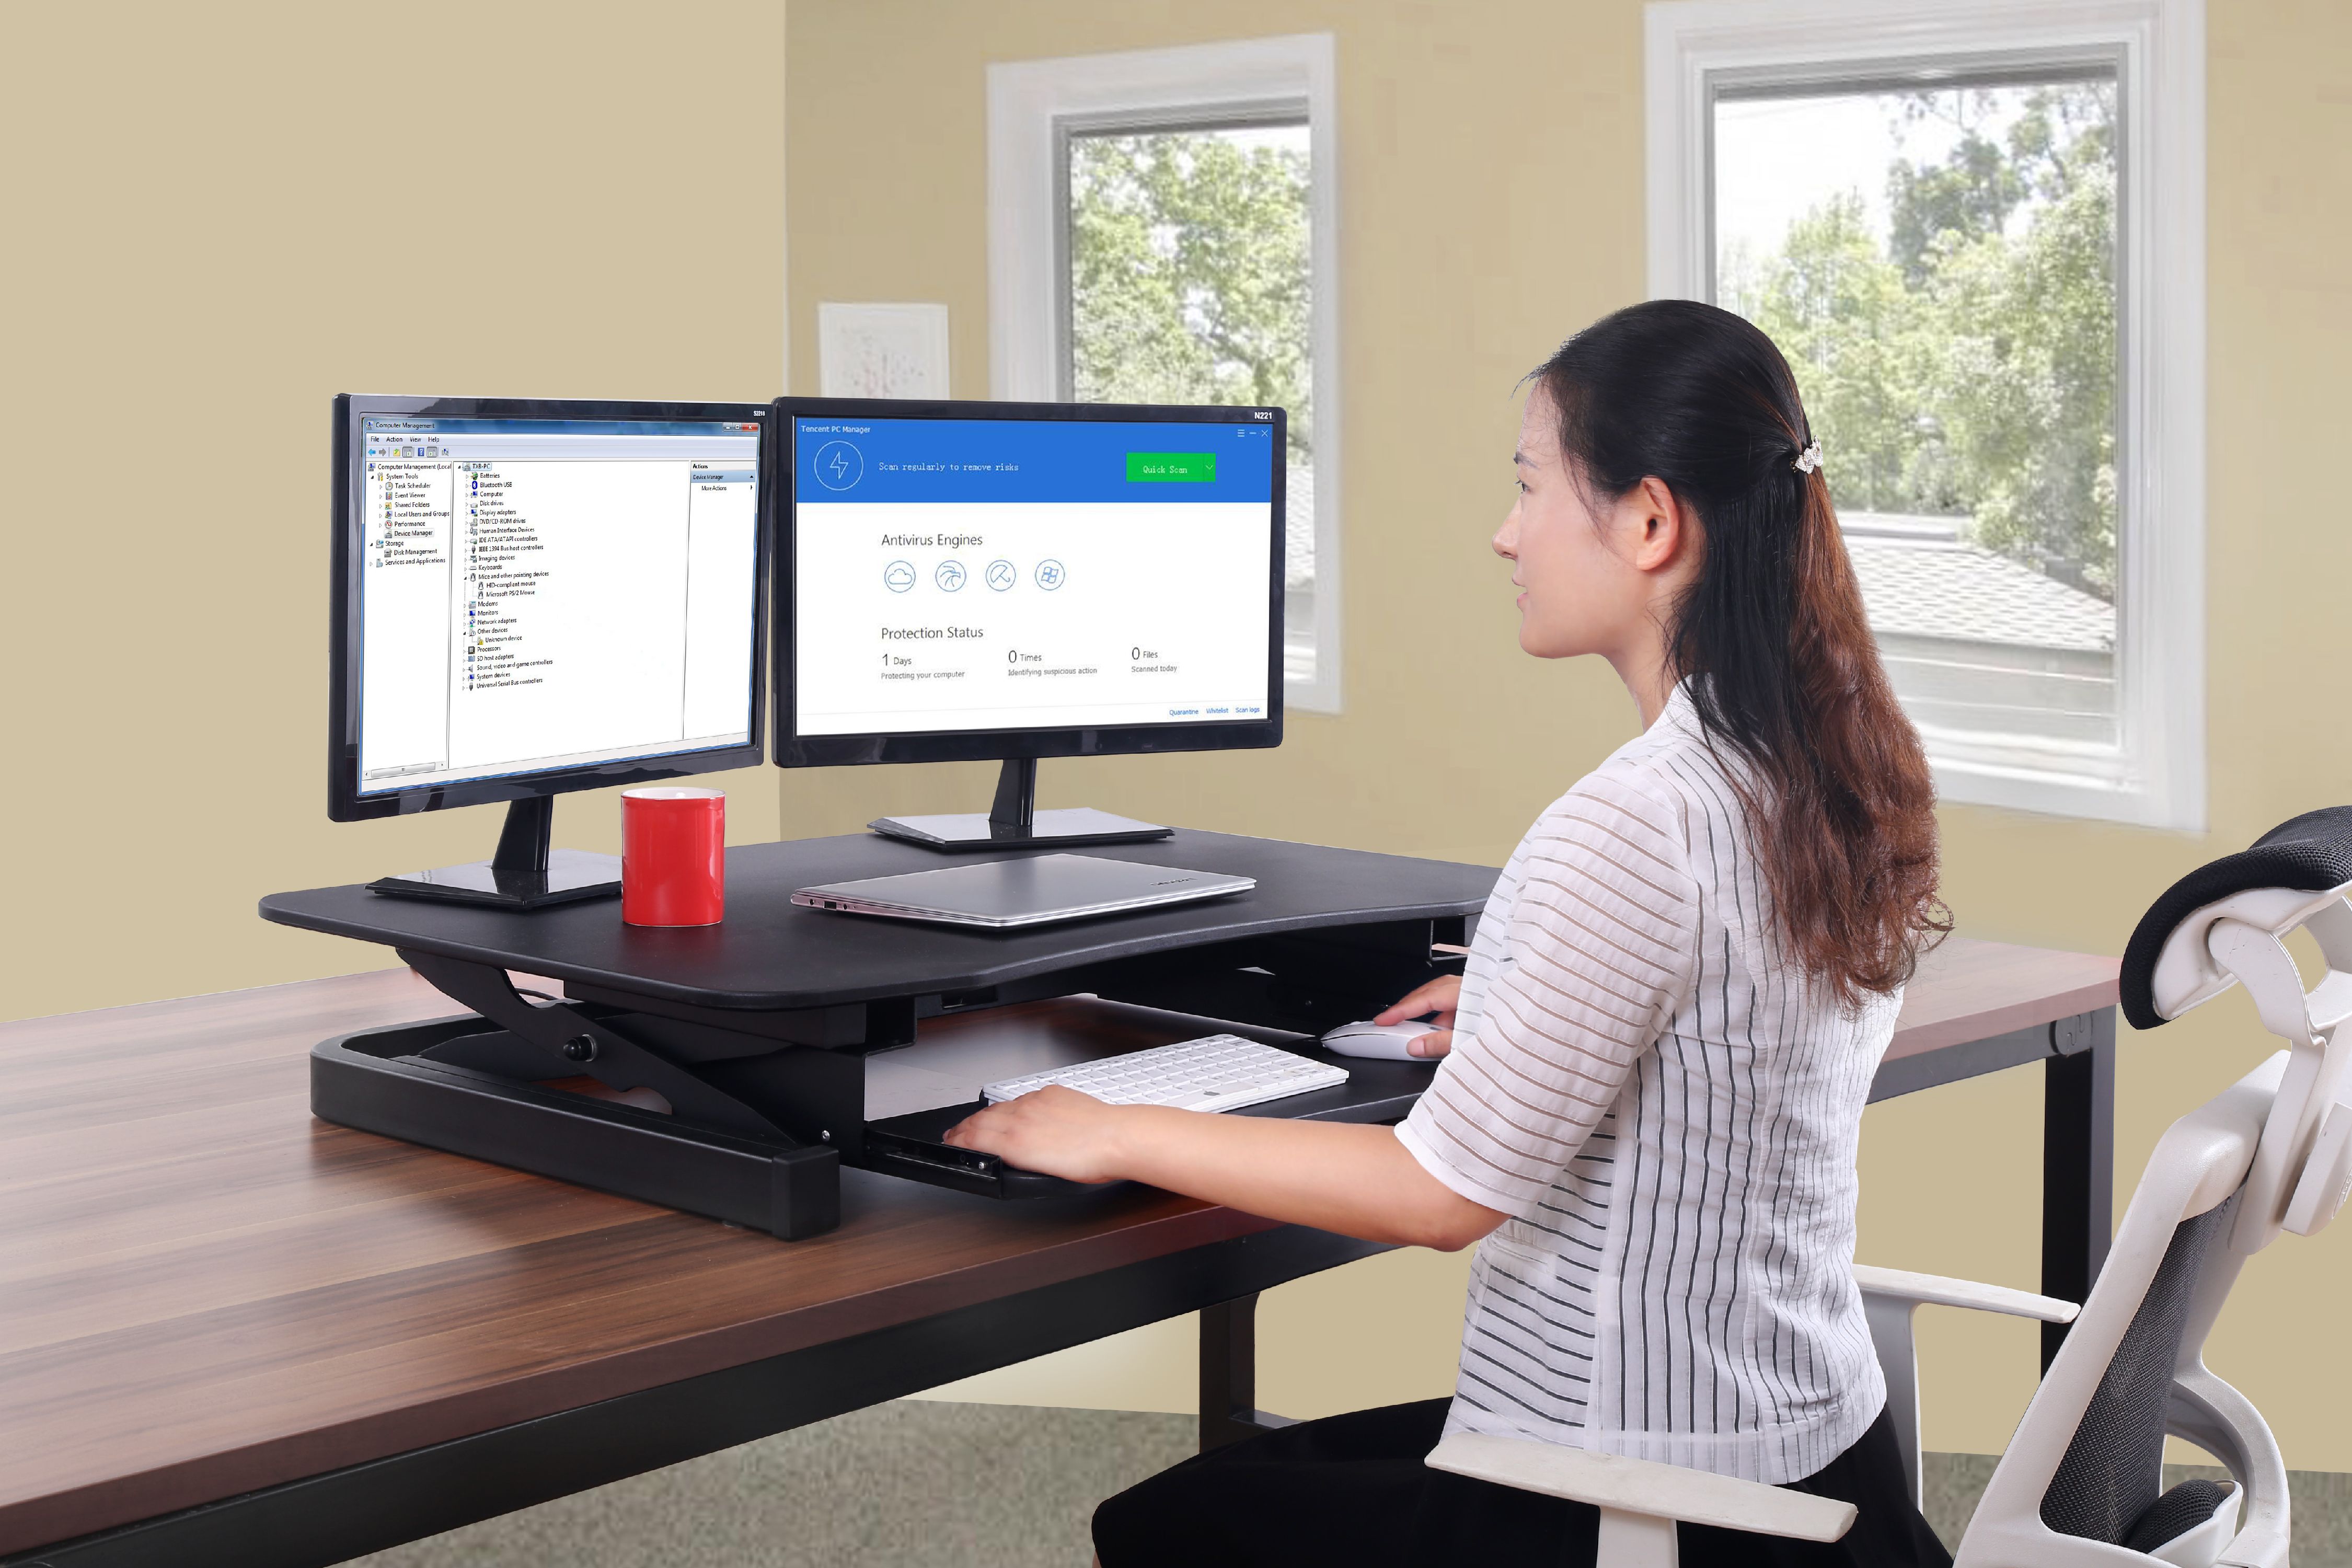 ApexDesk ZT Series Height Adjustable Sit to Stand Electric Desk Converter, 2-Tier Design with Large 36x24" Upper Work Surface and Lower Keyboard Tray Deck (Black) - image 2 of 8